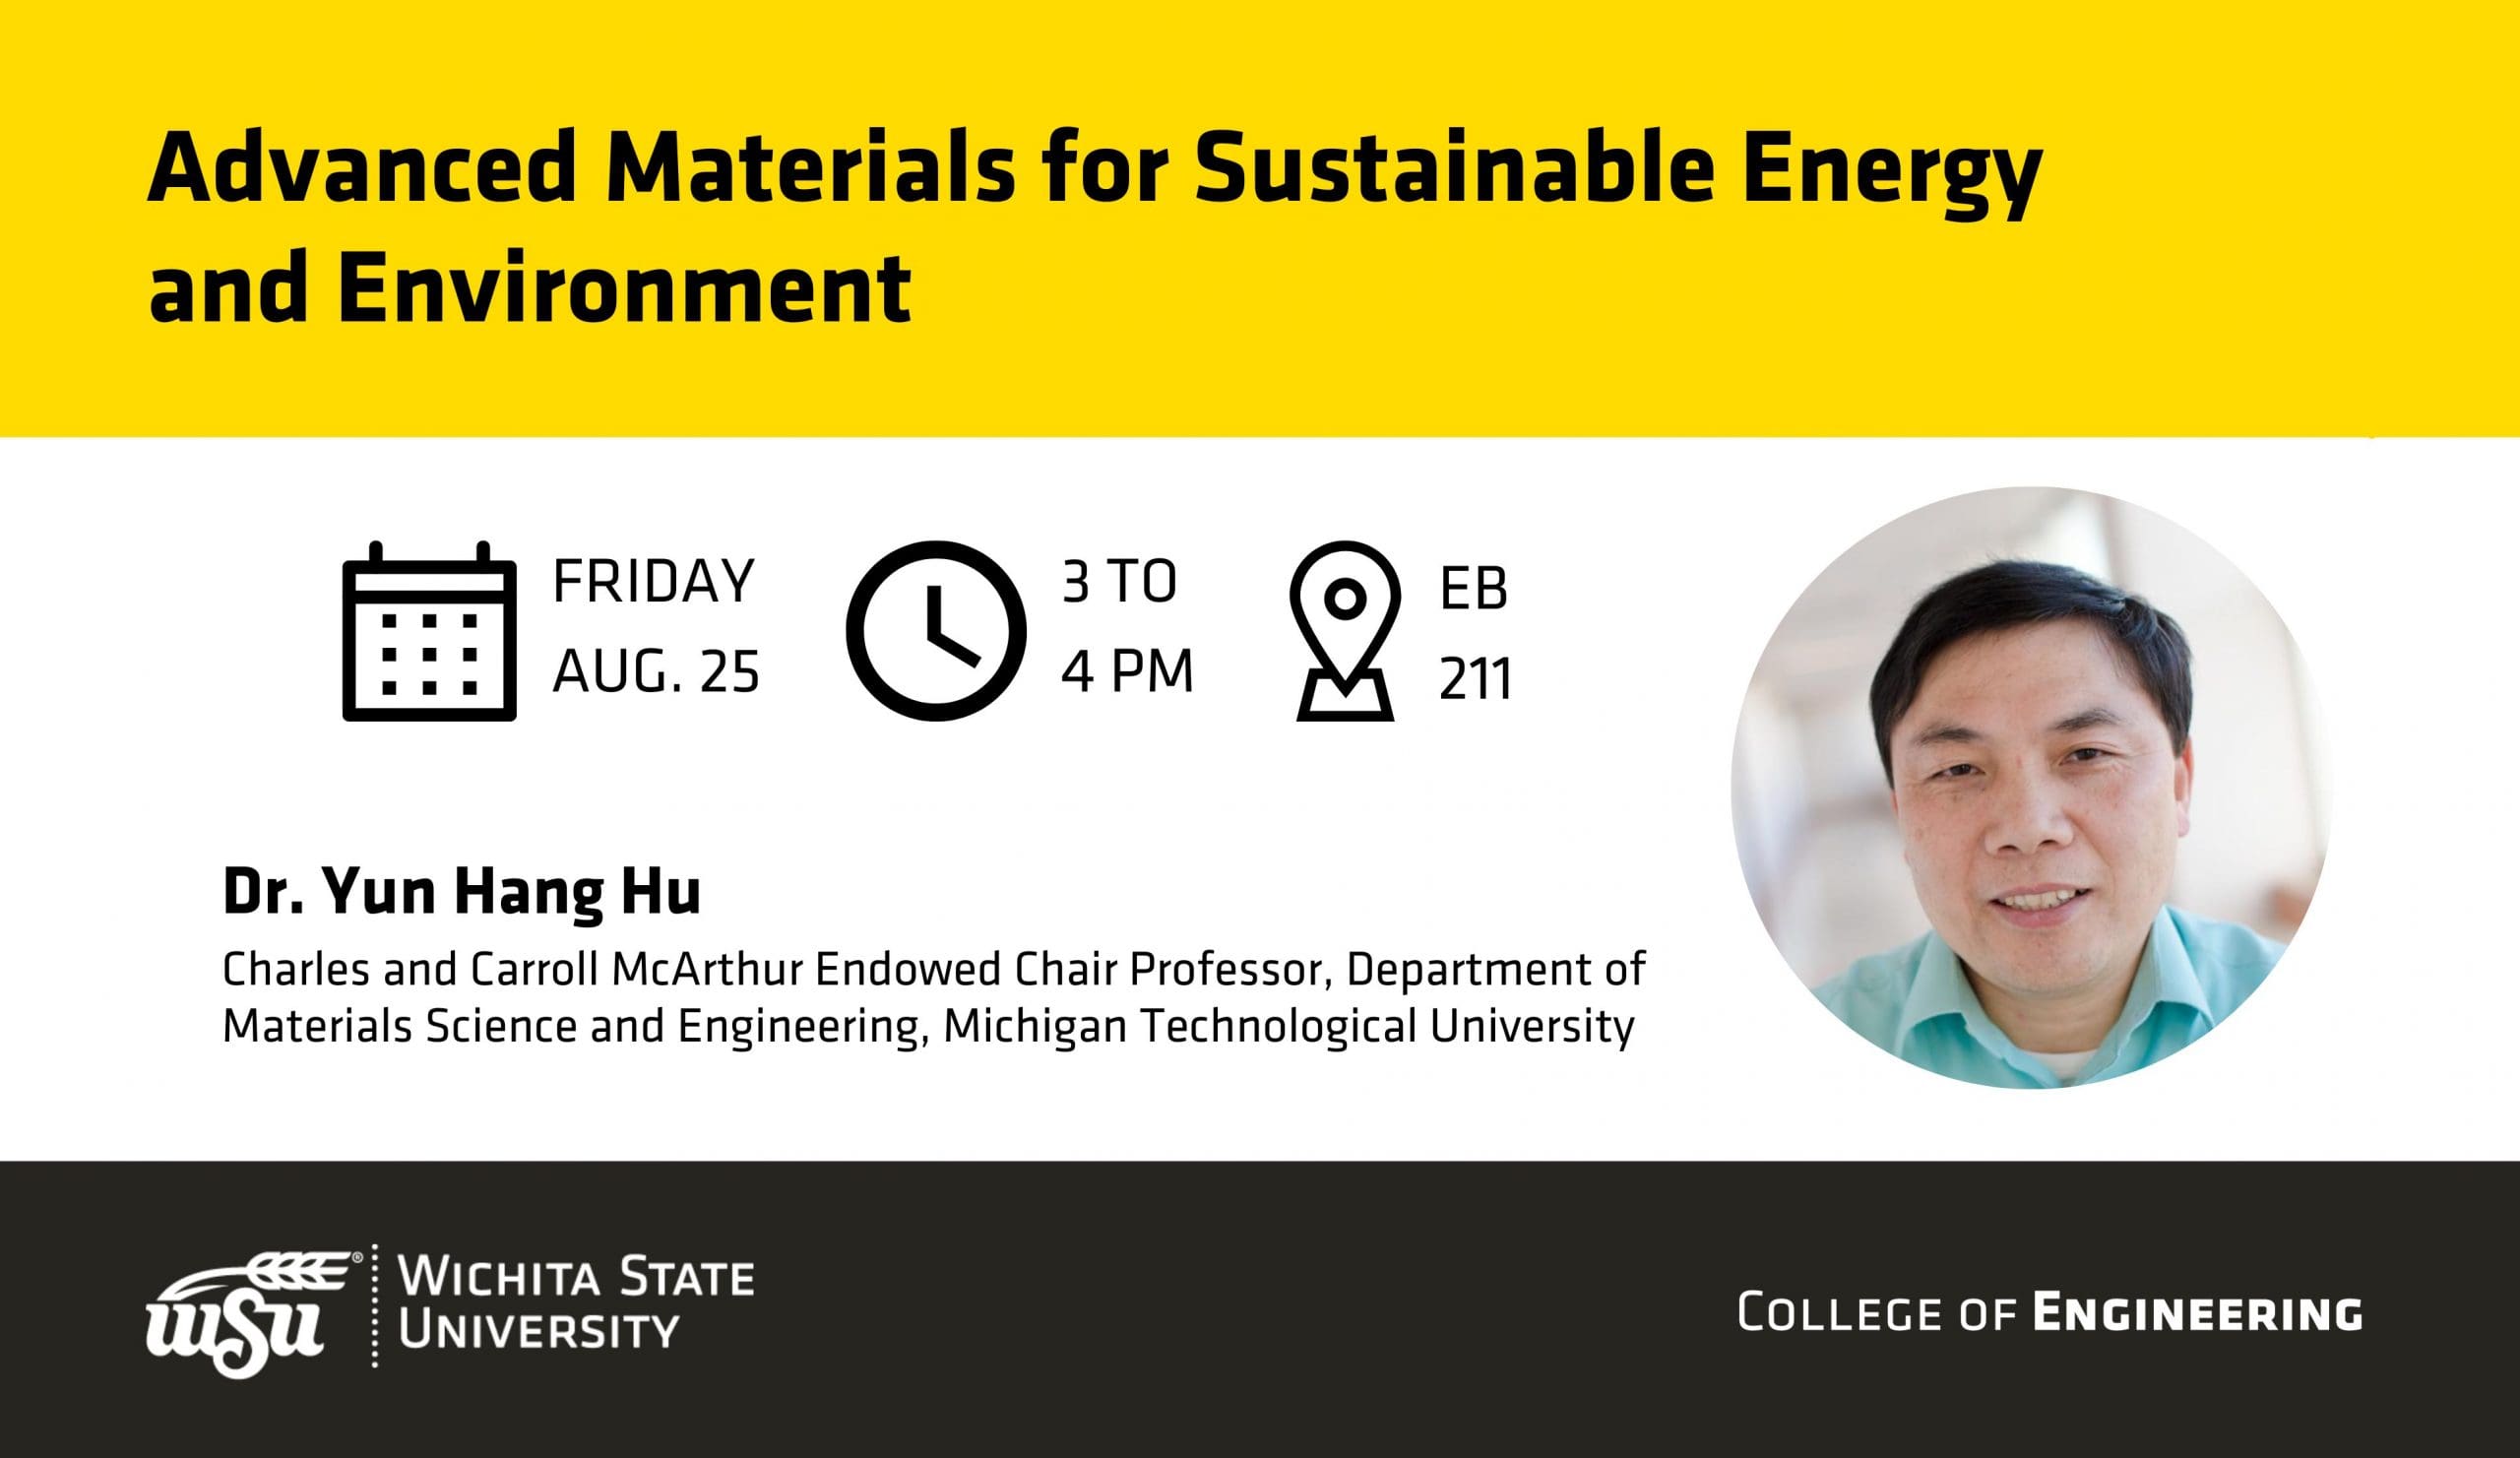 "Advanced Materials for Sustainable Energy and Environment" | Friday, August 25 | 3 to 4 pm | EB, 211 | Dr. Yun Hang Hu, the Charles and Carroll McArthur Endowed Chair Professor, Department of Materials Science and Engineering, Michigan Technological University